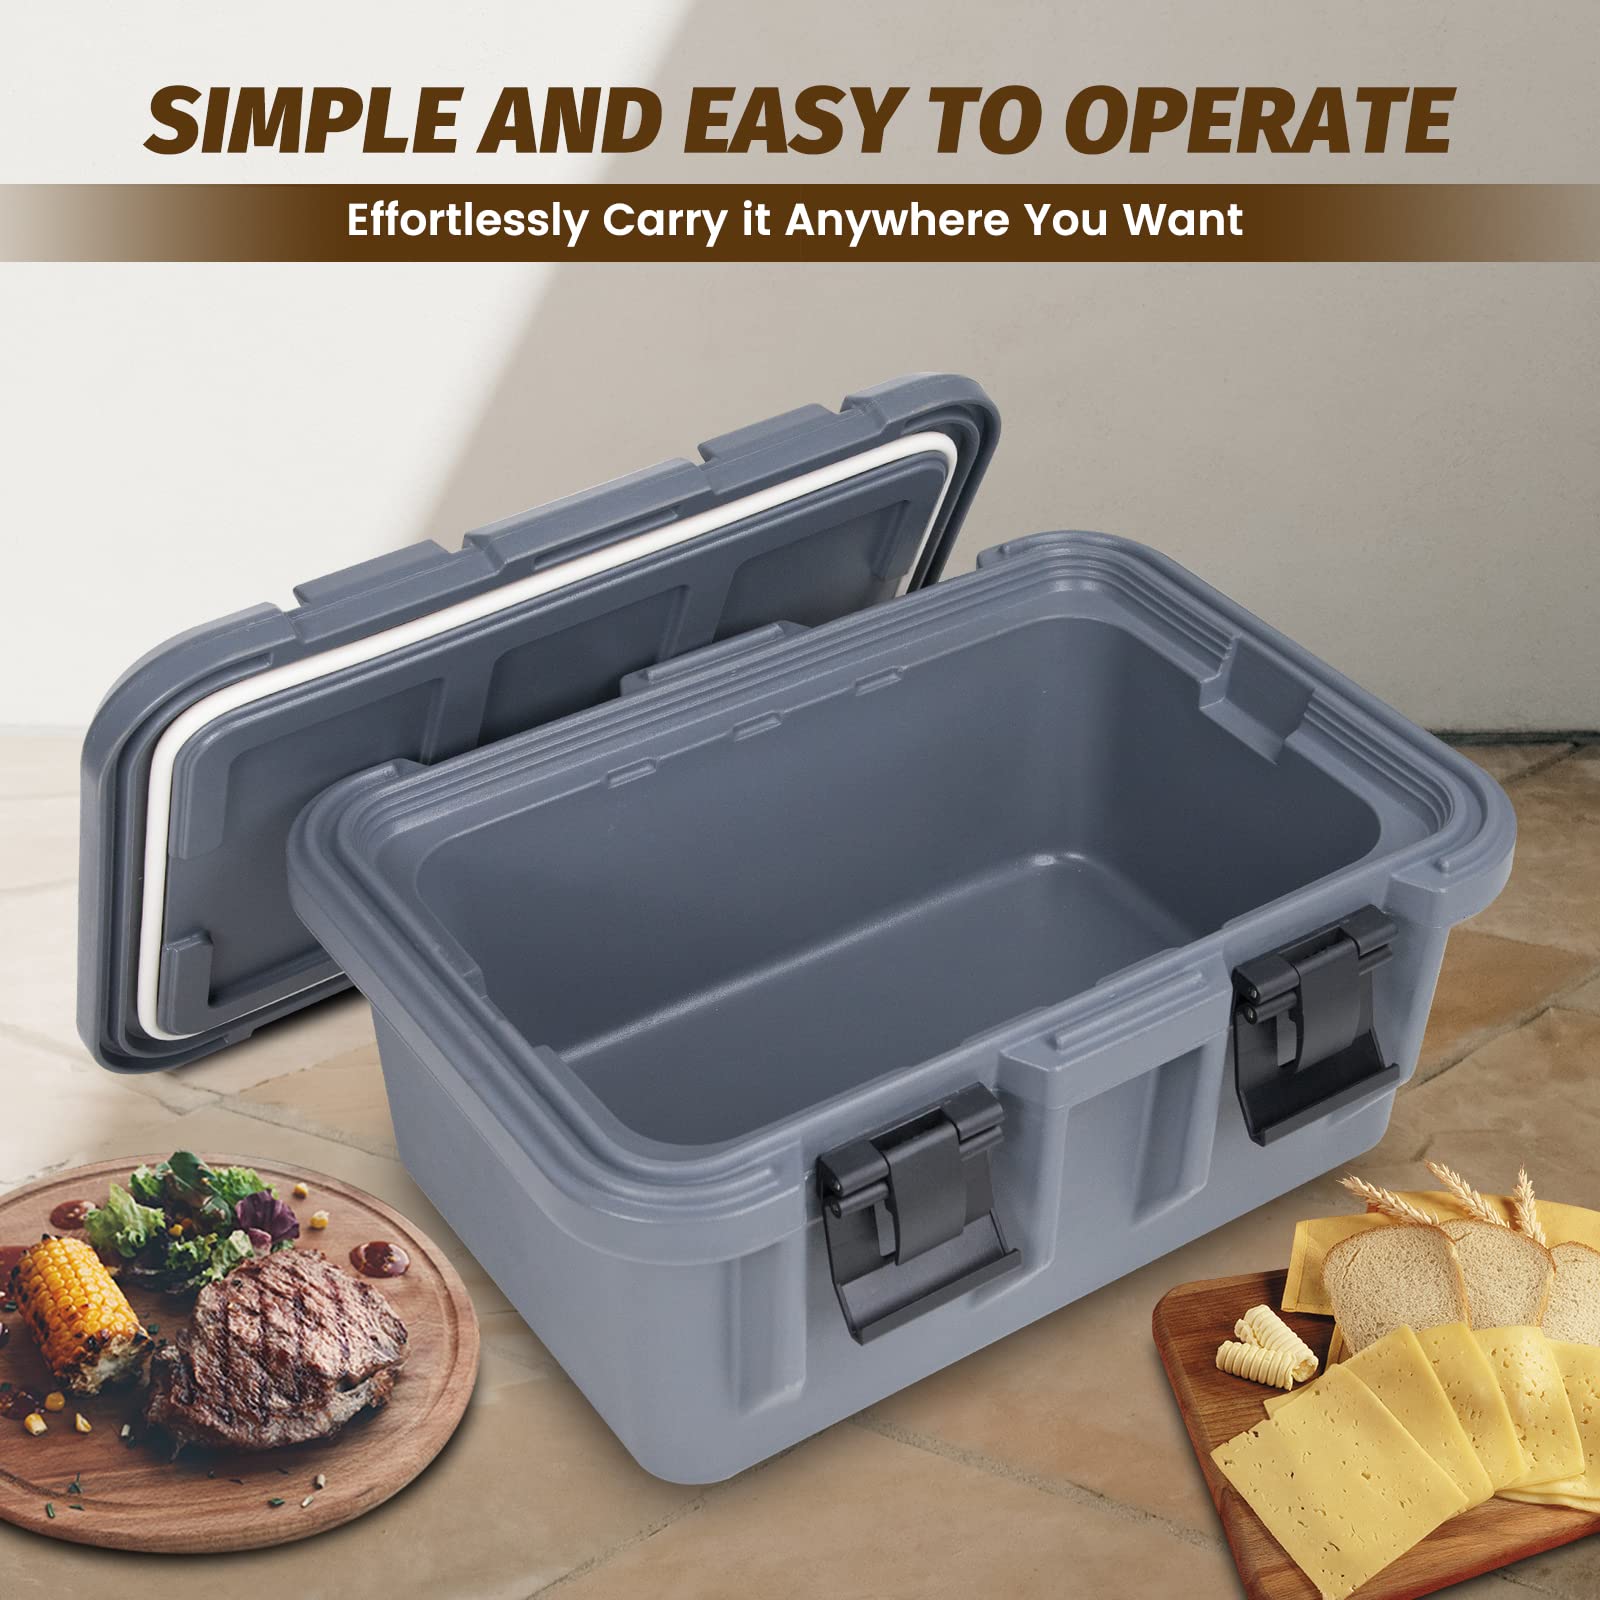 Hakka 29L Insulated Food Pan Carrier, Stackable and Loader, Suit for Restaurant, Canteen, Outdoor Banquets, Black